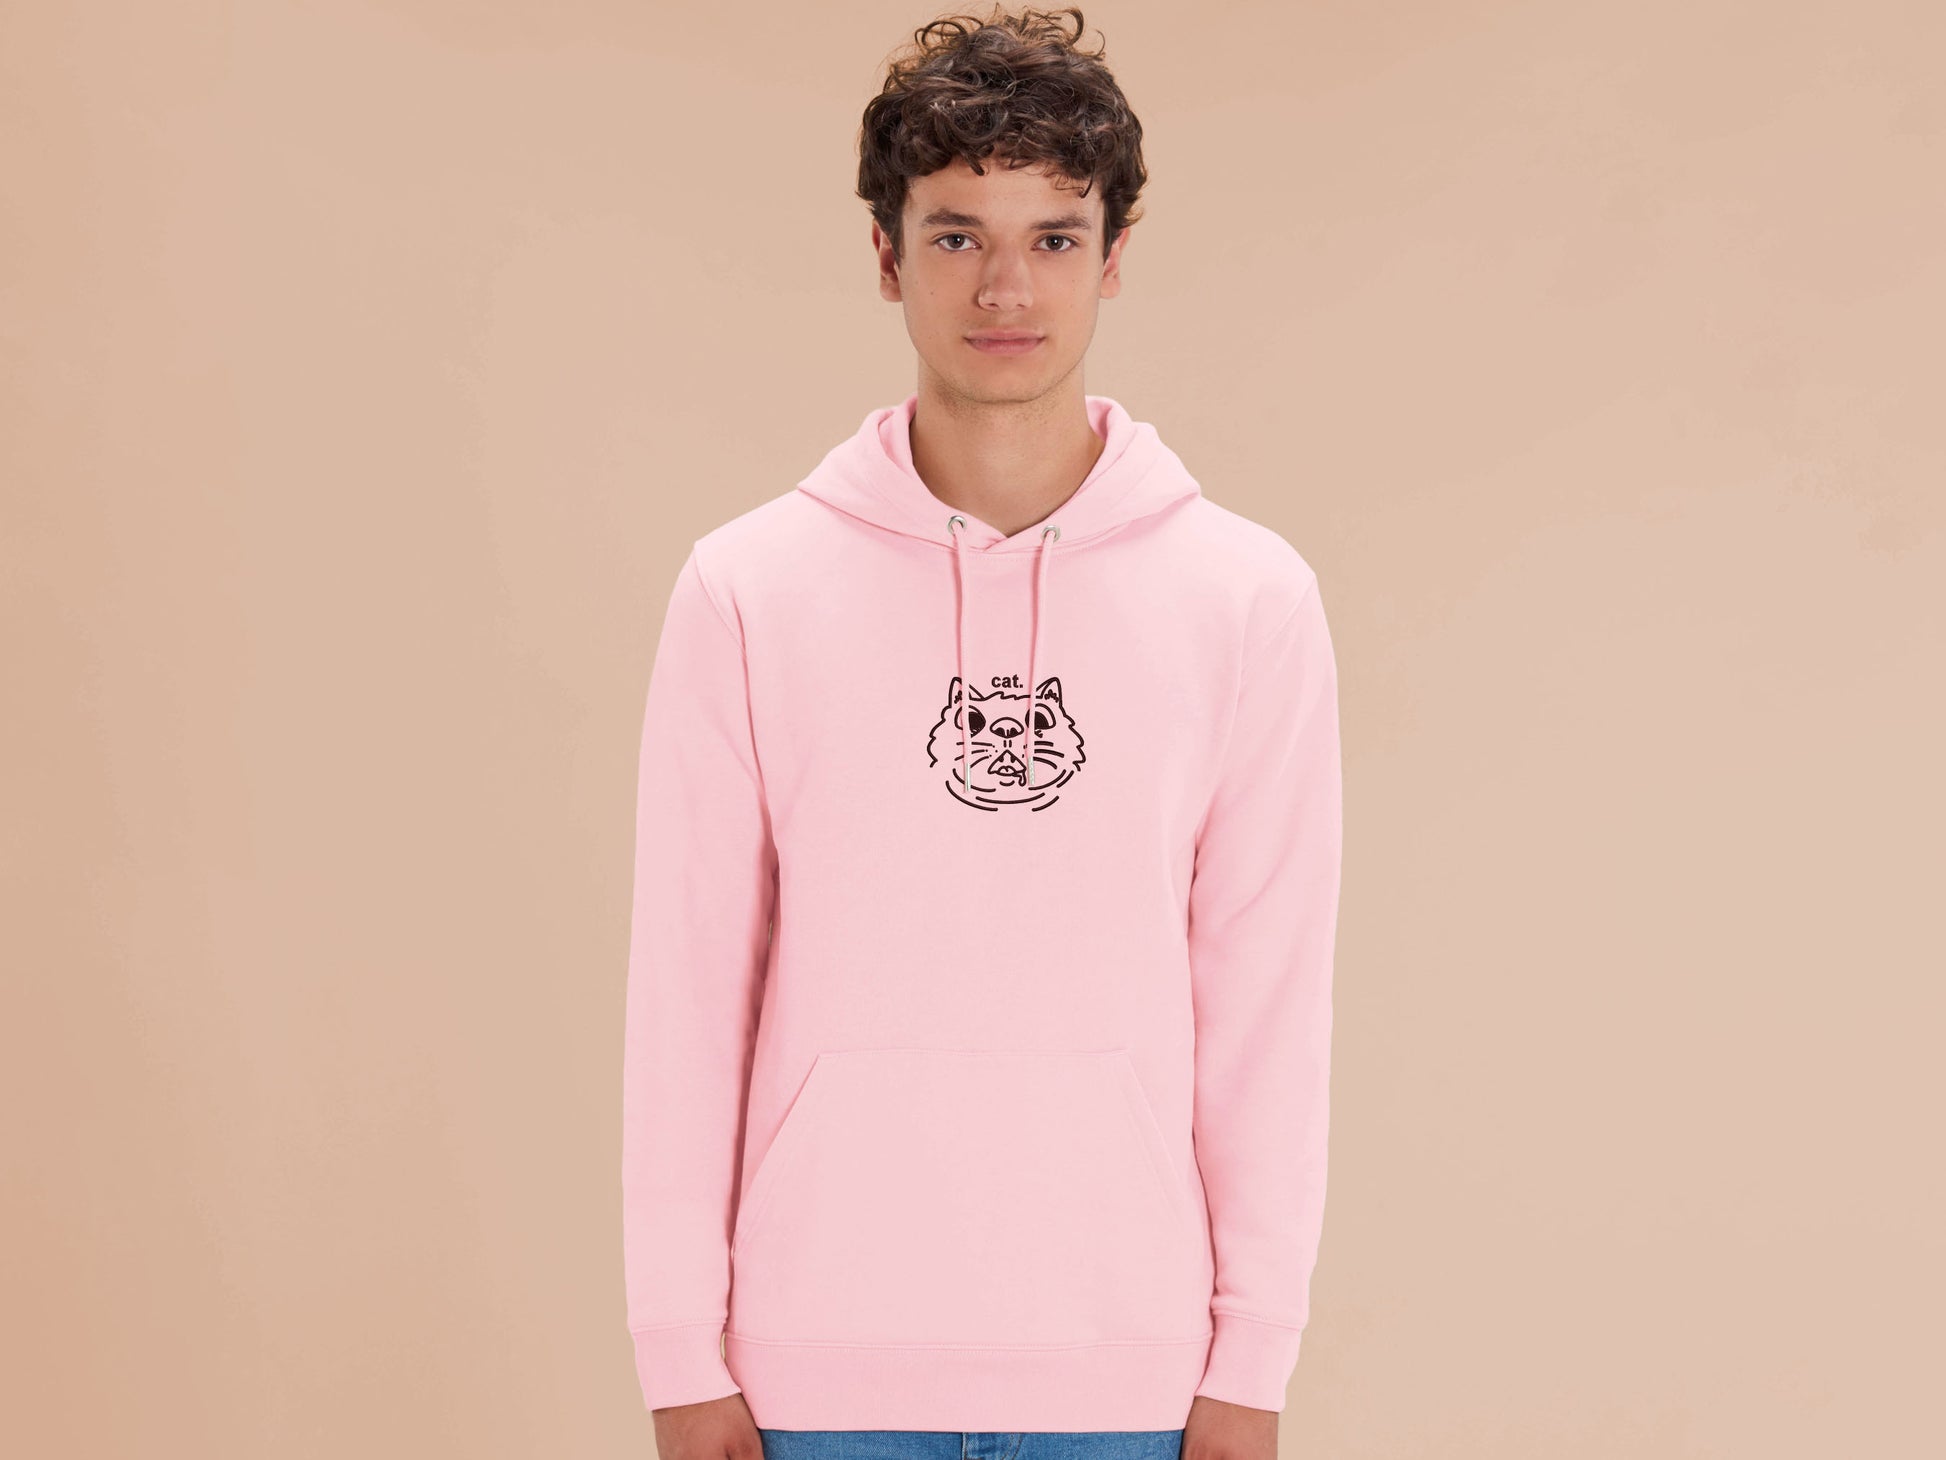 Man wearing a long sleeved pink fleece hoodie with an Embroidered cat design